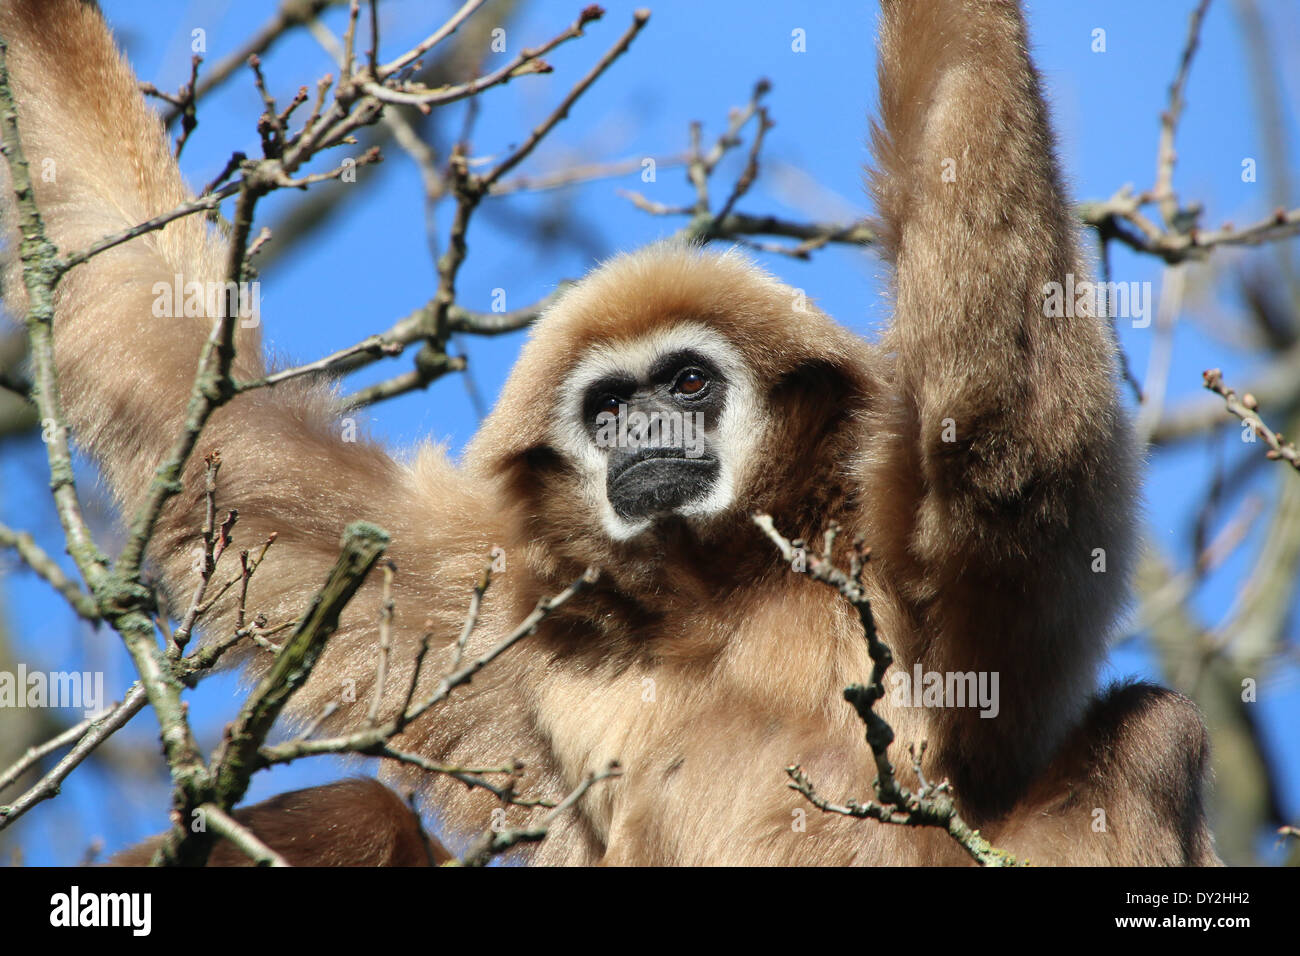 Lar Gibbon or  White-Handed gibbon (Hylobates lar) in a tree, close-up of the head Stock Photo